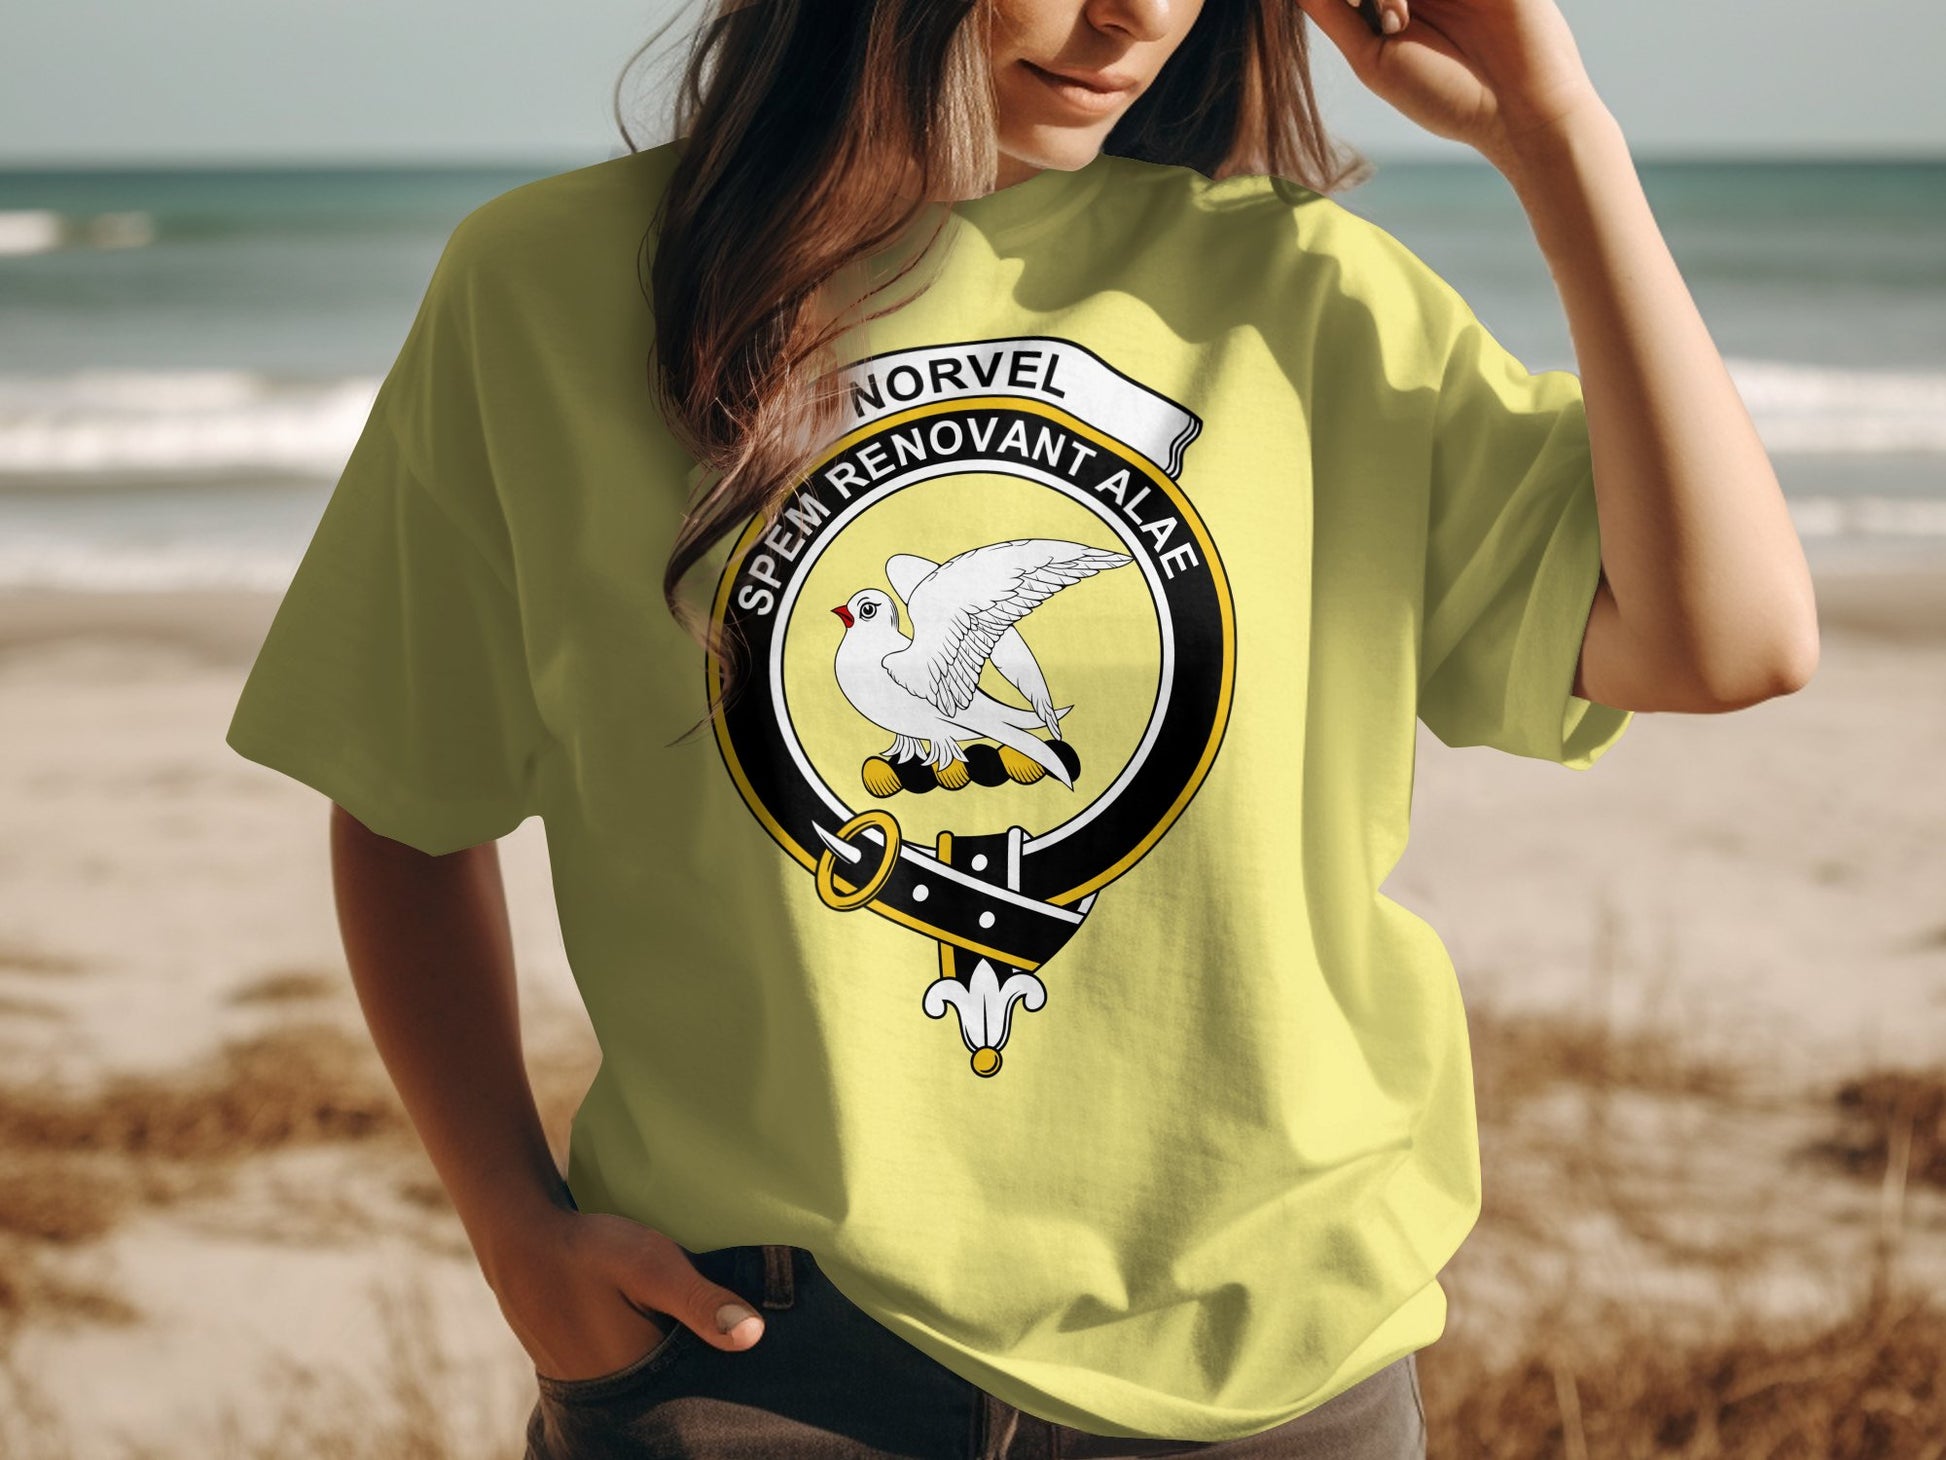 Norvel Scottish Clan Crest T-Shirt for Highland Games - Living Stone Gifts